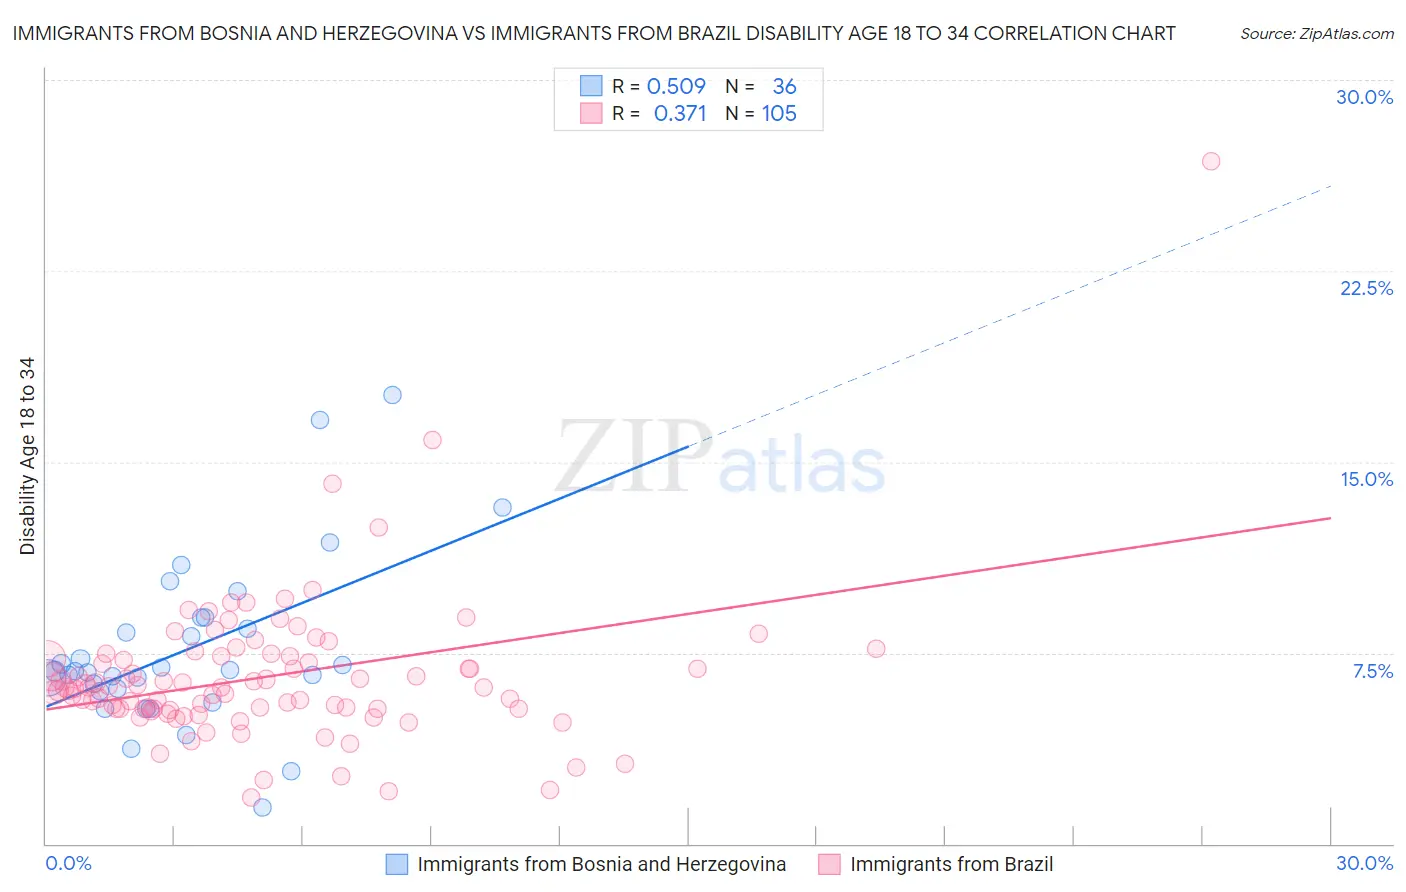 Immigrants from Bosnia and Herzegovina vs Immigrants from Brazil Disability Age 18 to 34